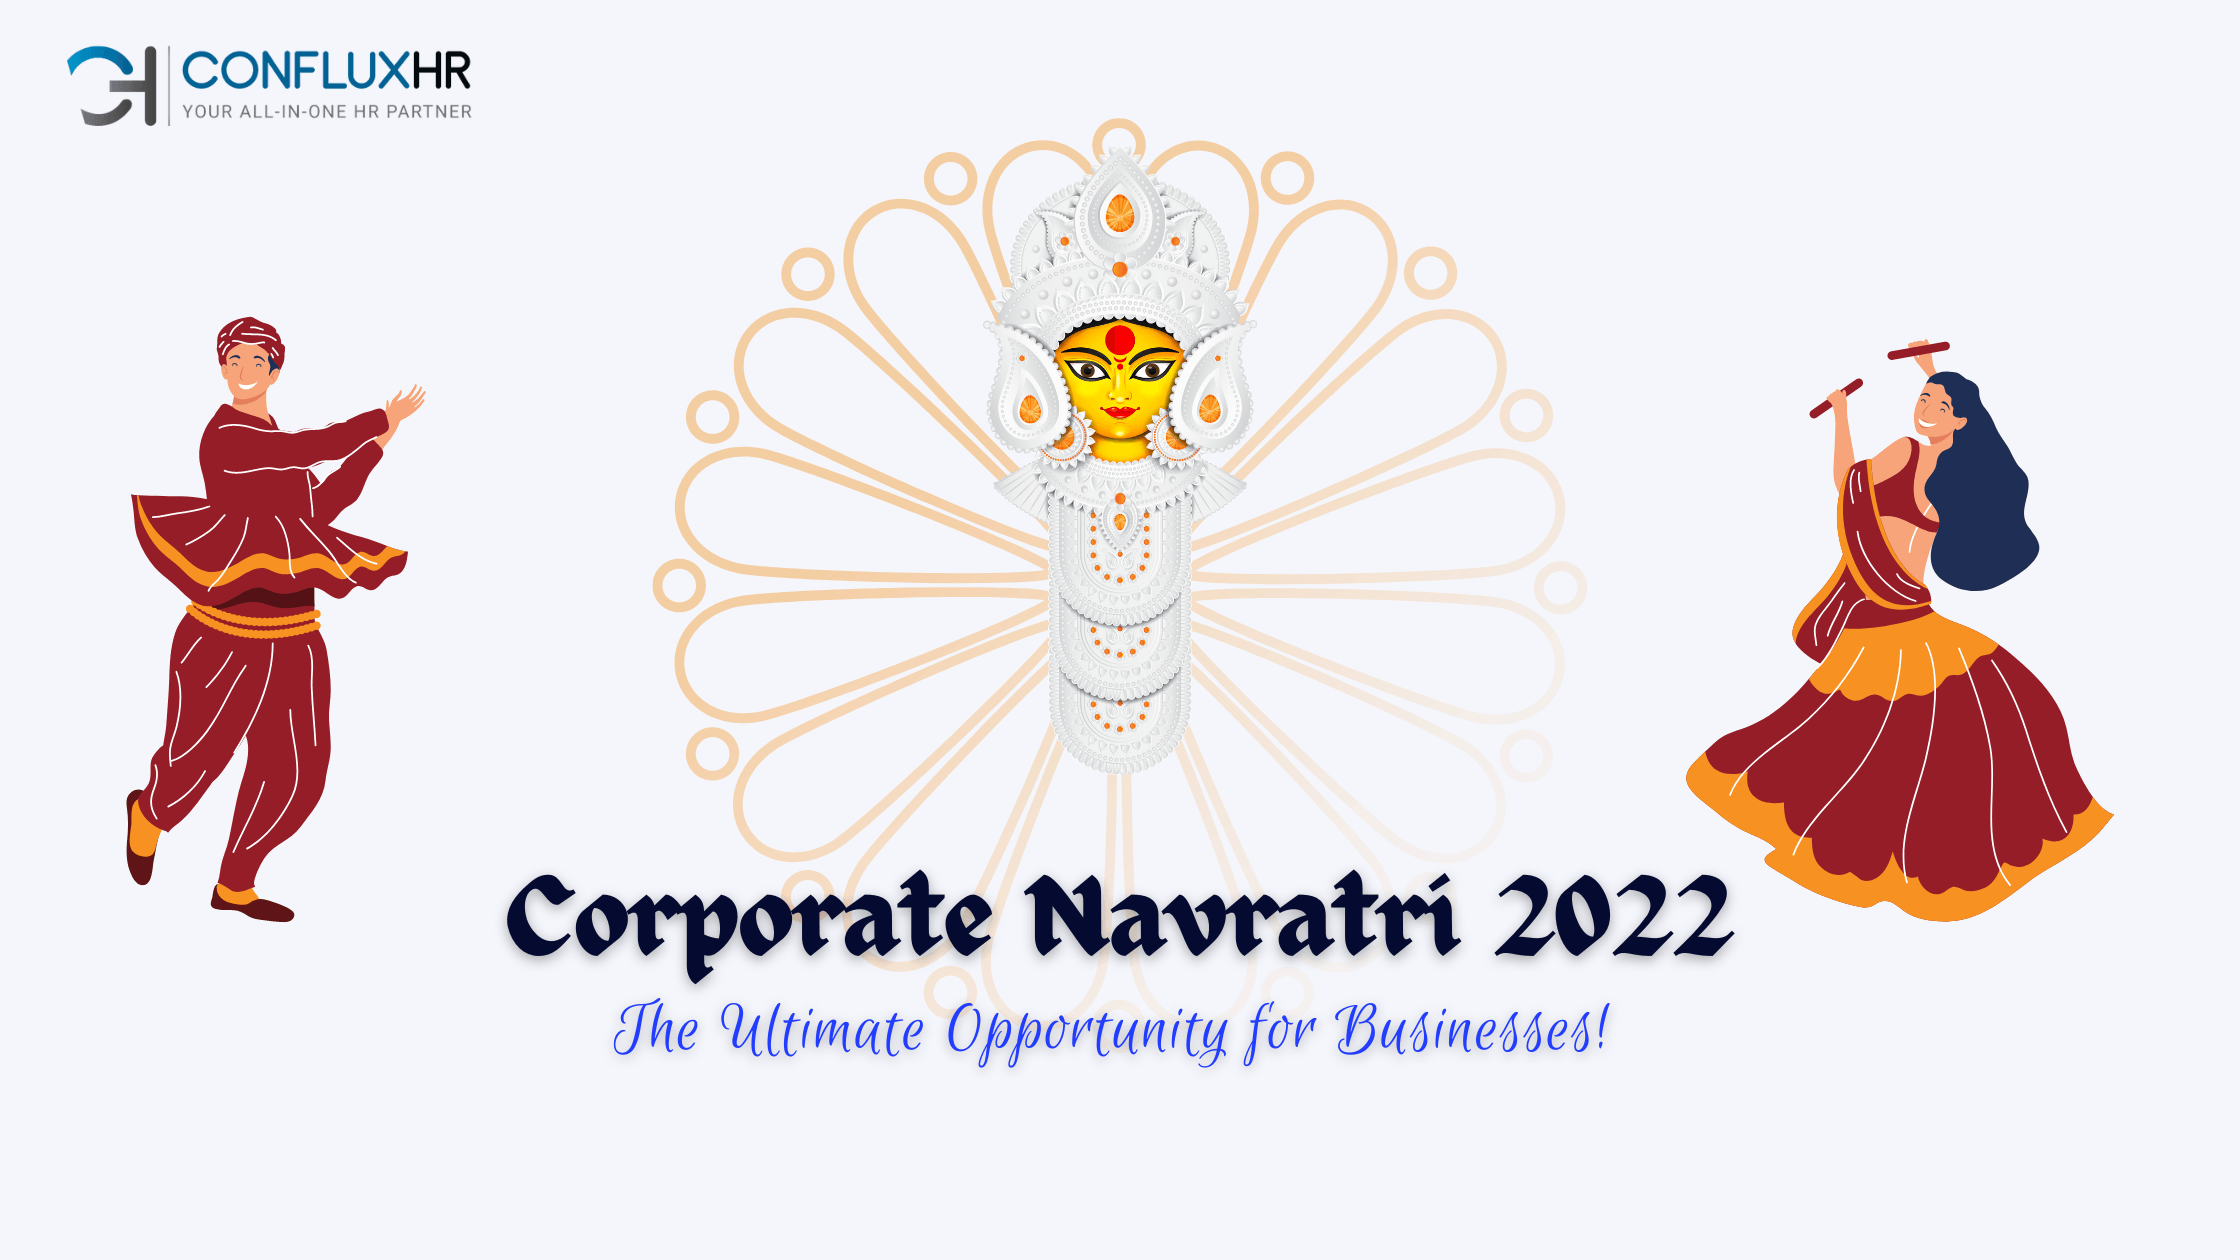 What's Trending During Corporate Navratri 2022?